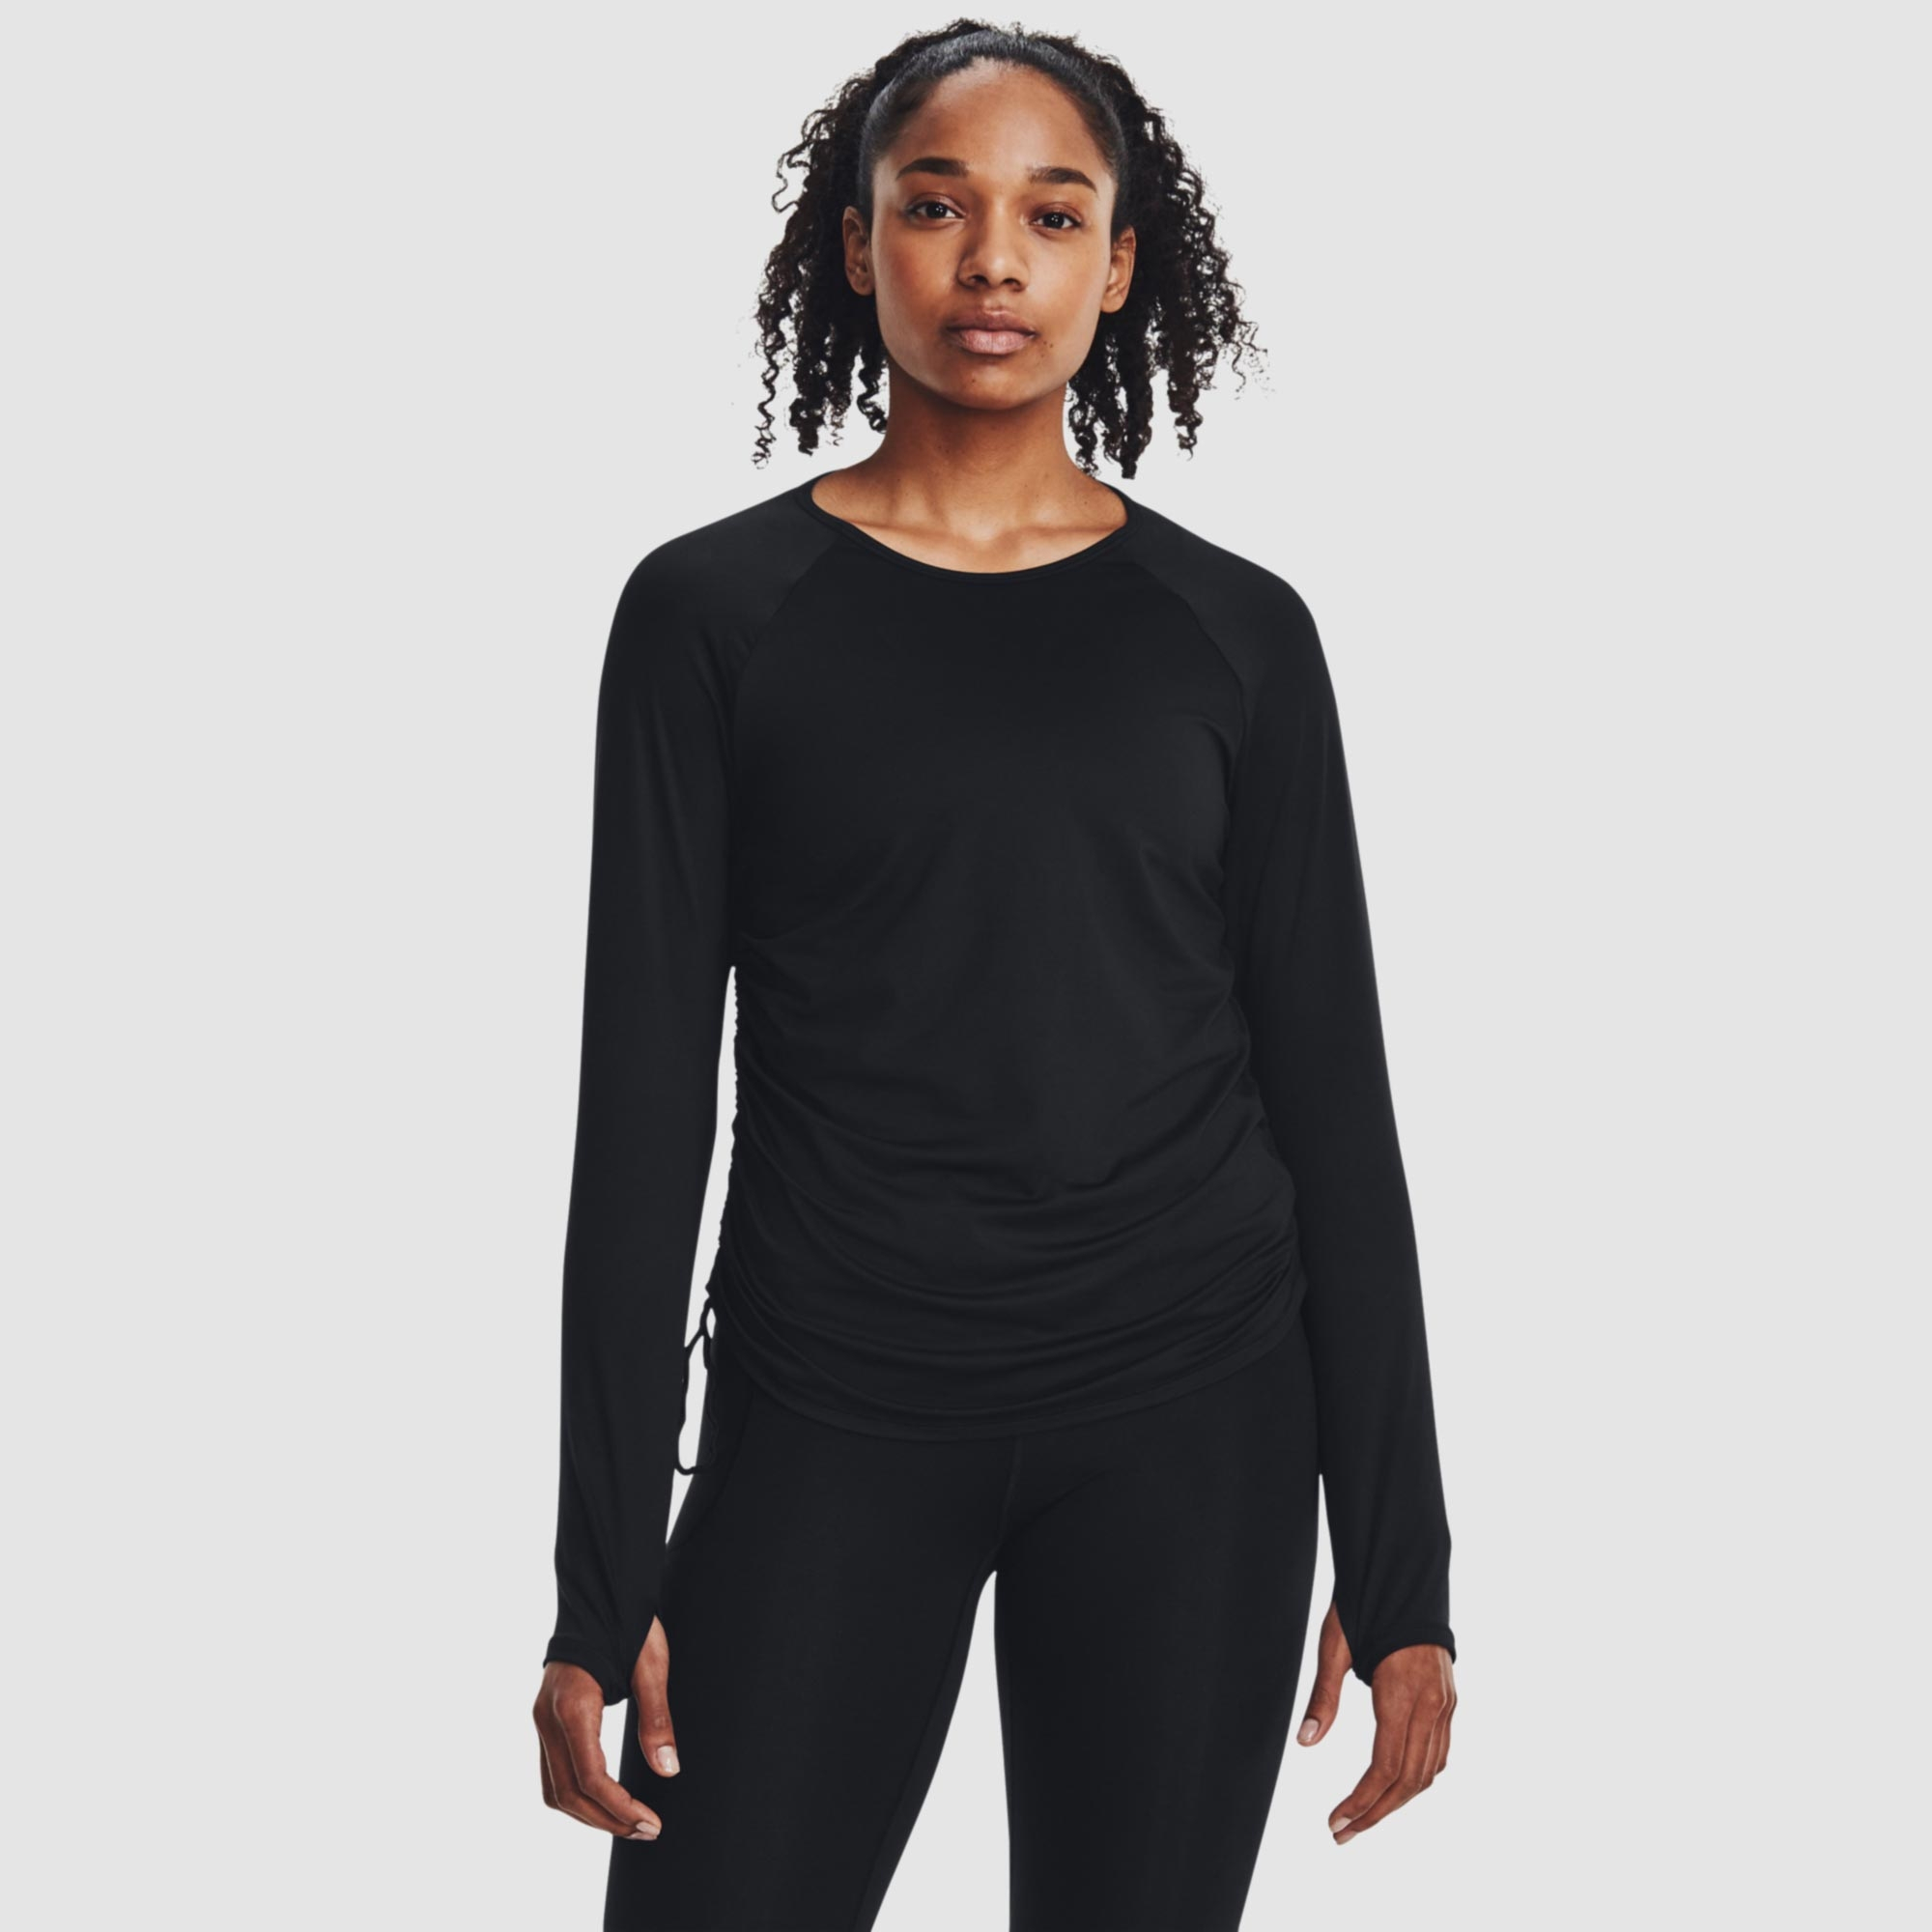 Under Armour Womens Motion Longline Long Sleeve Top Top